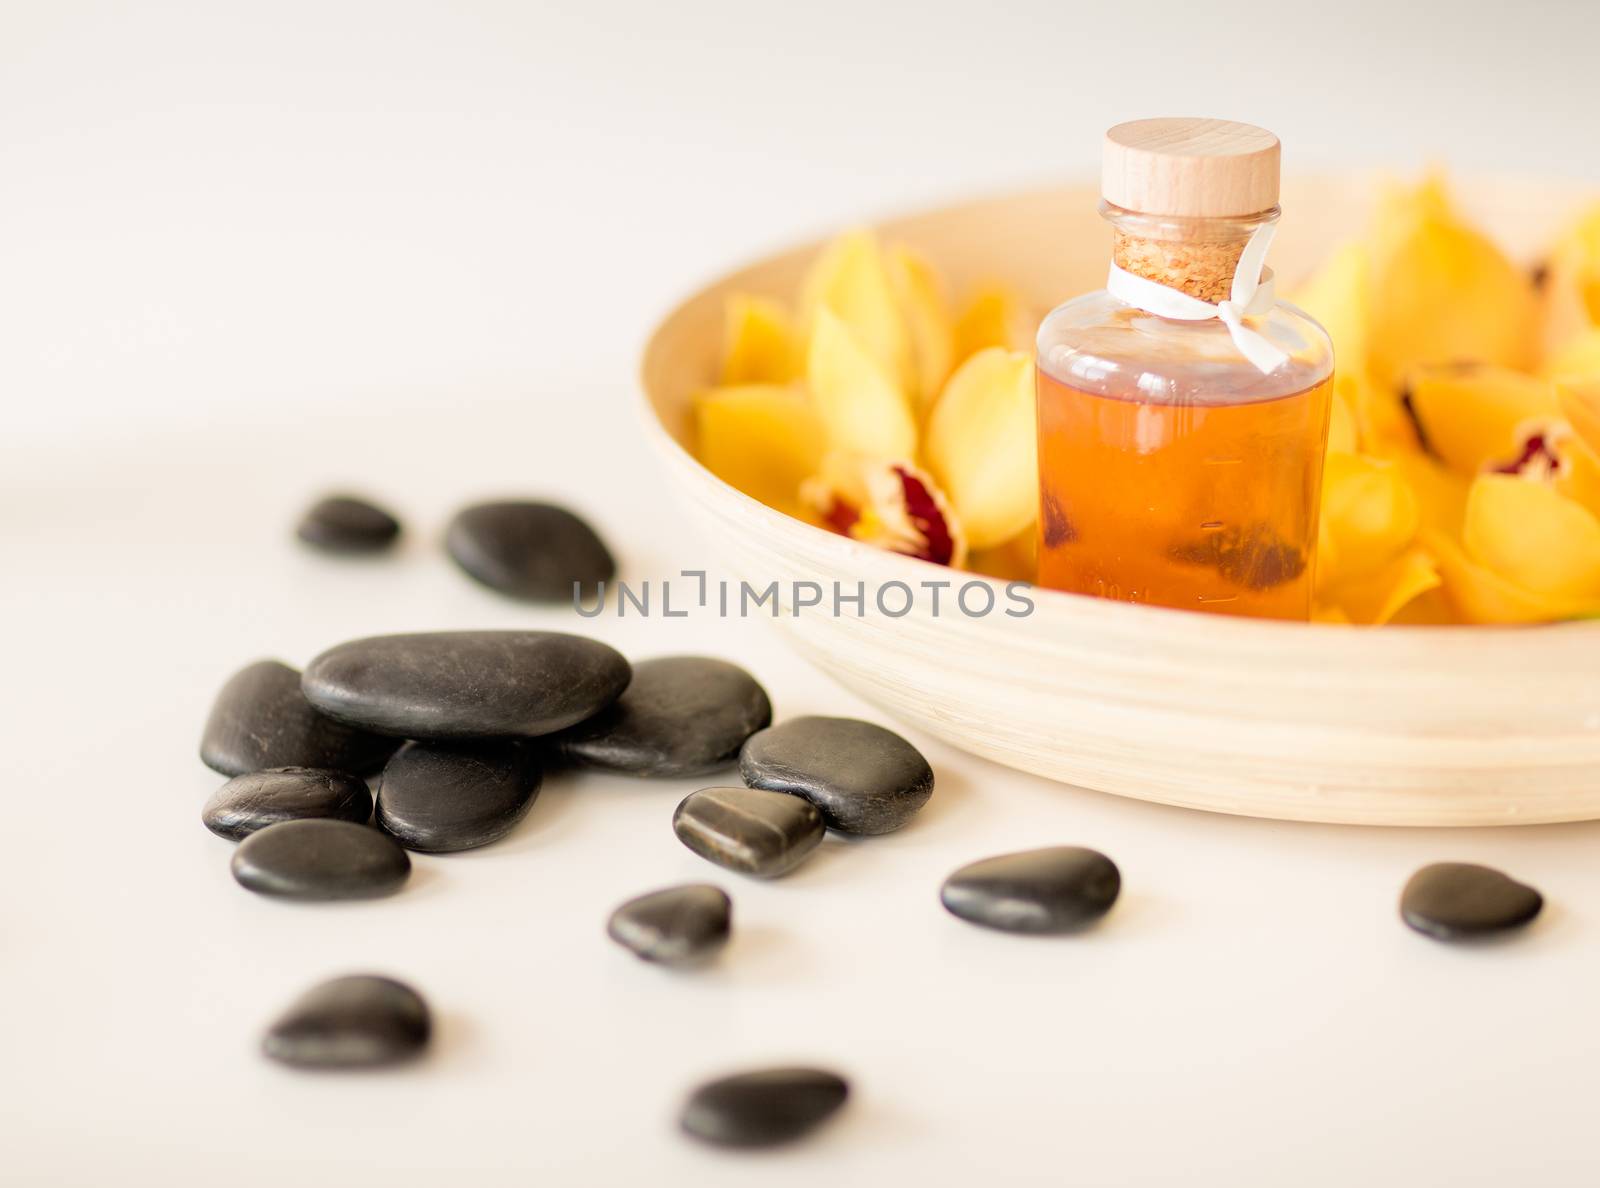 massage stones with flowers on table by dolgachov